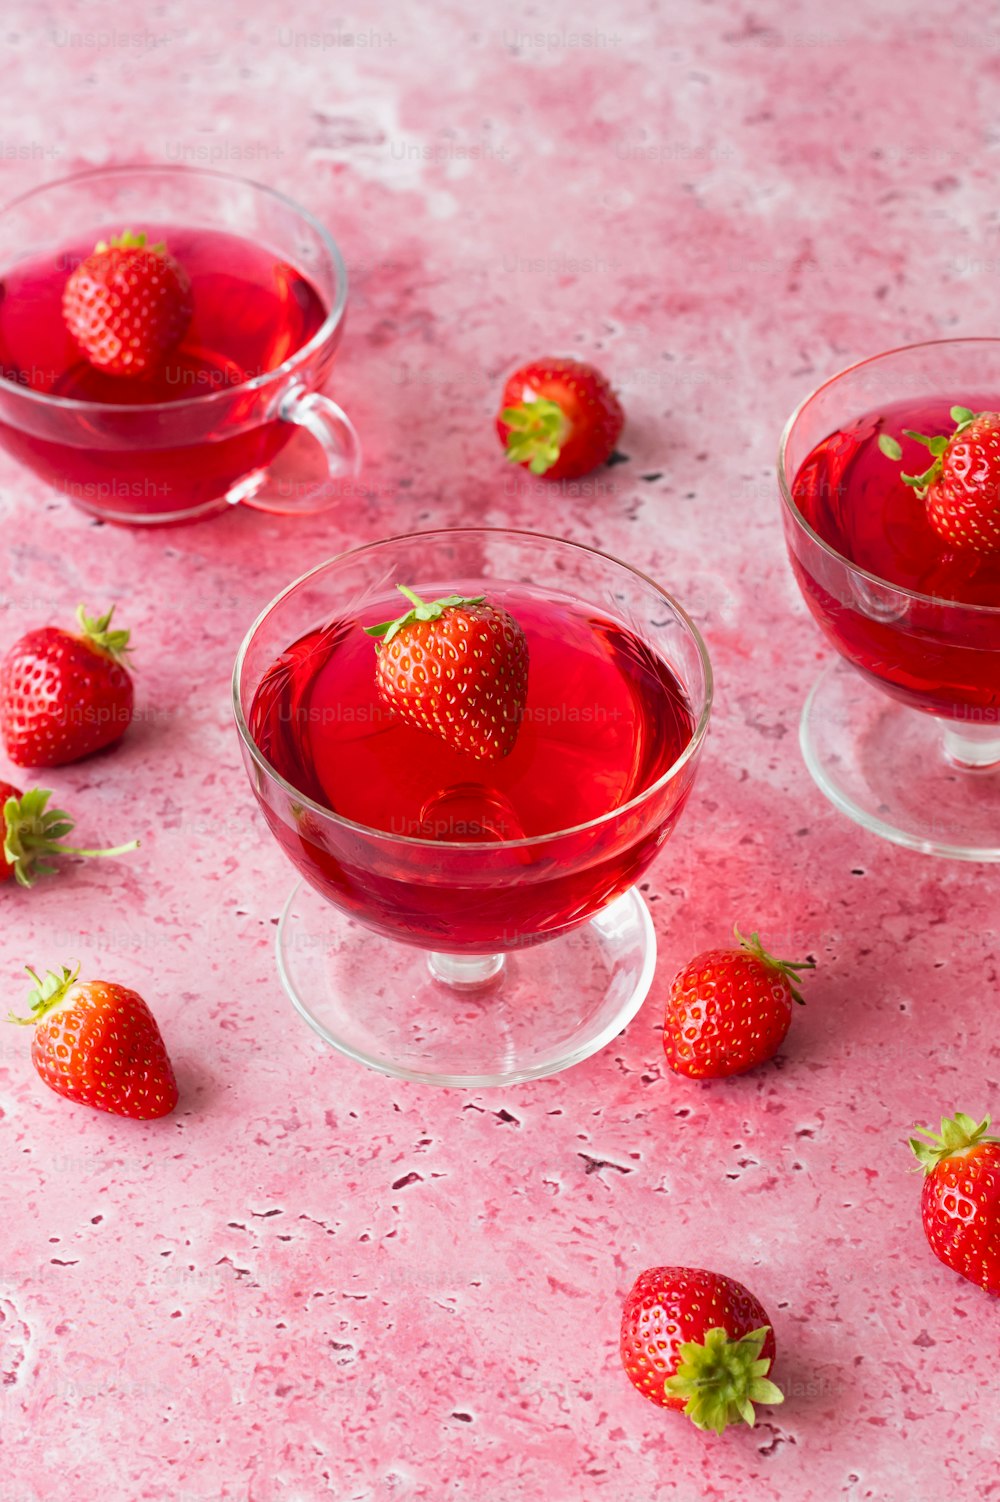 three glasses of red liquid with strawberries on a pink surface